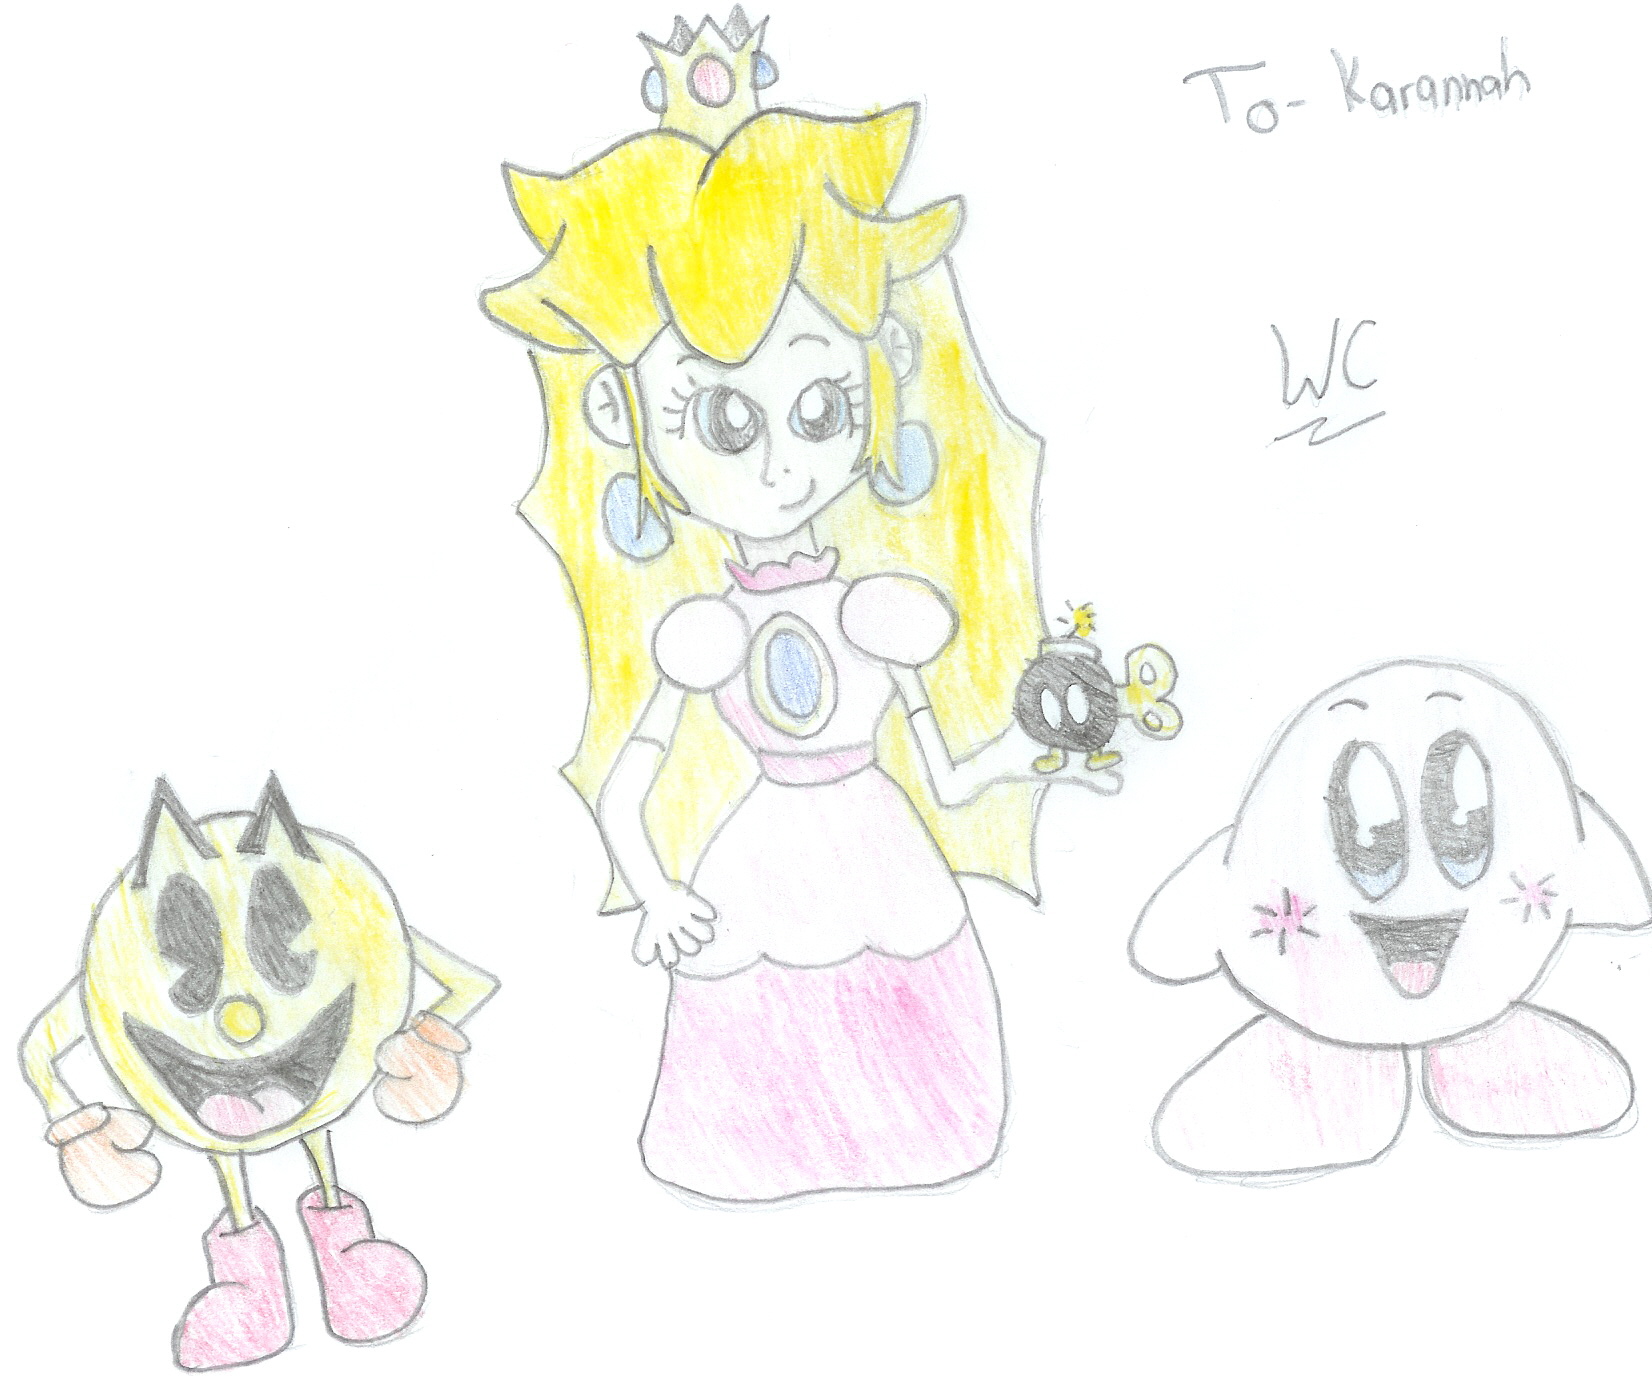 Peach, Bob-omb, Kirby, and Pac-Man (request for Karannah) by pacmaster2000